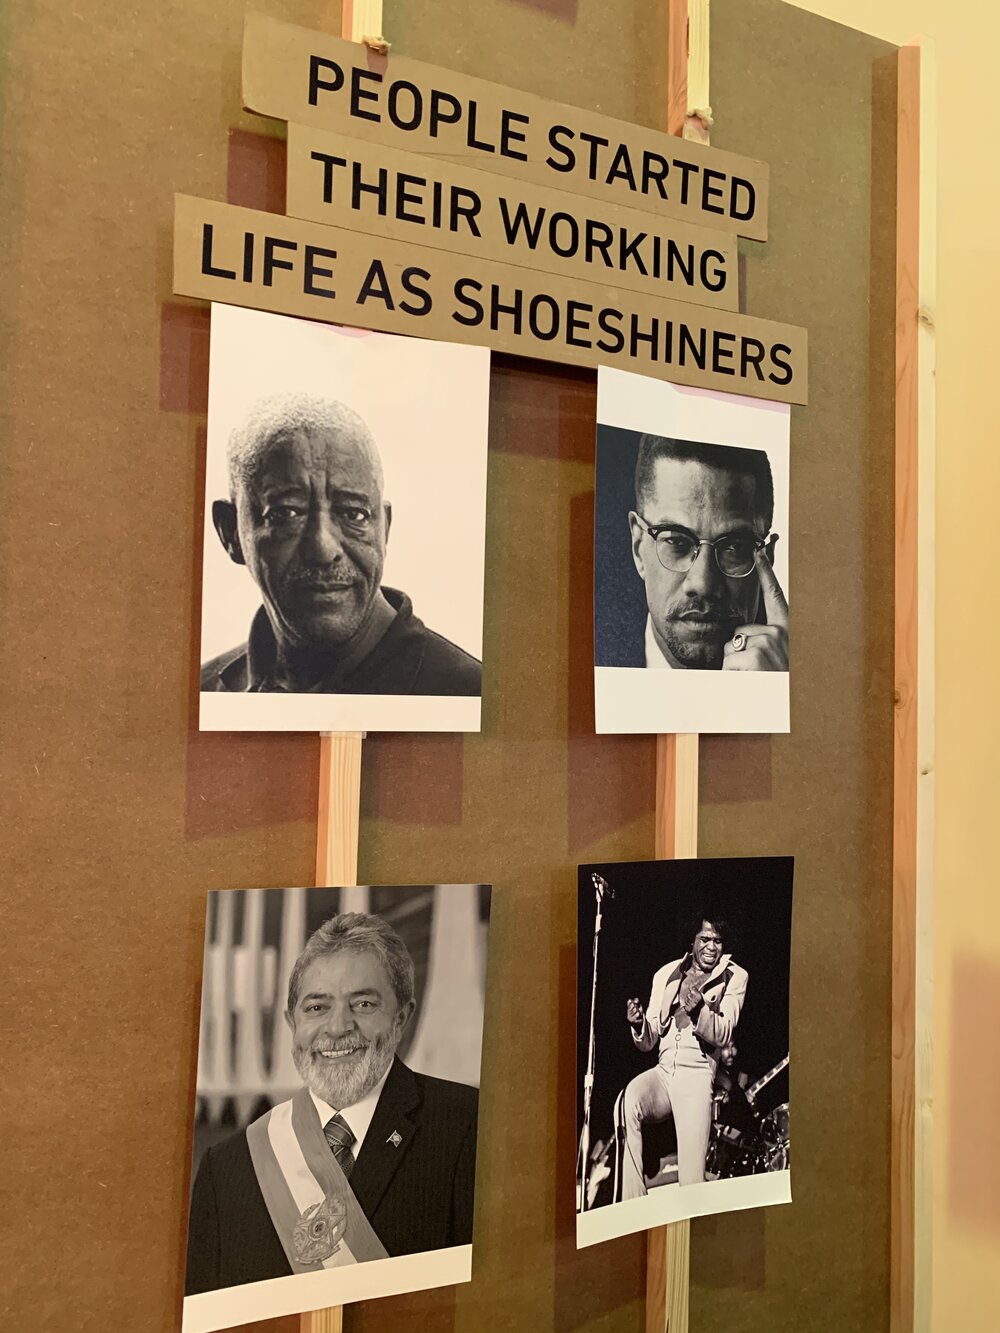 A display from one of the trade show exhibitors. Mahmoud Ahmed, an Ethiopian singer, is the top left picture. Not pictured - disgraced Gov. Rod Blagojevich (D-IL)